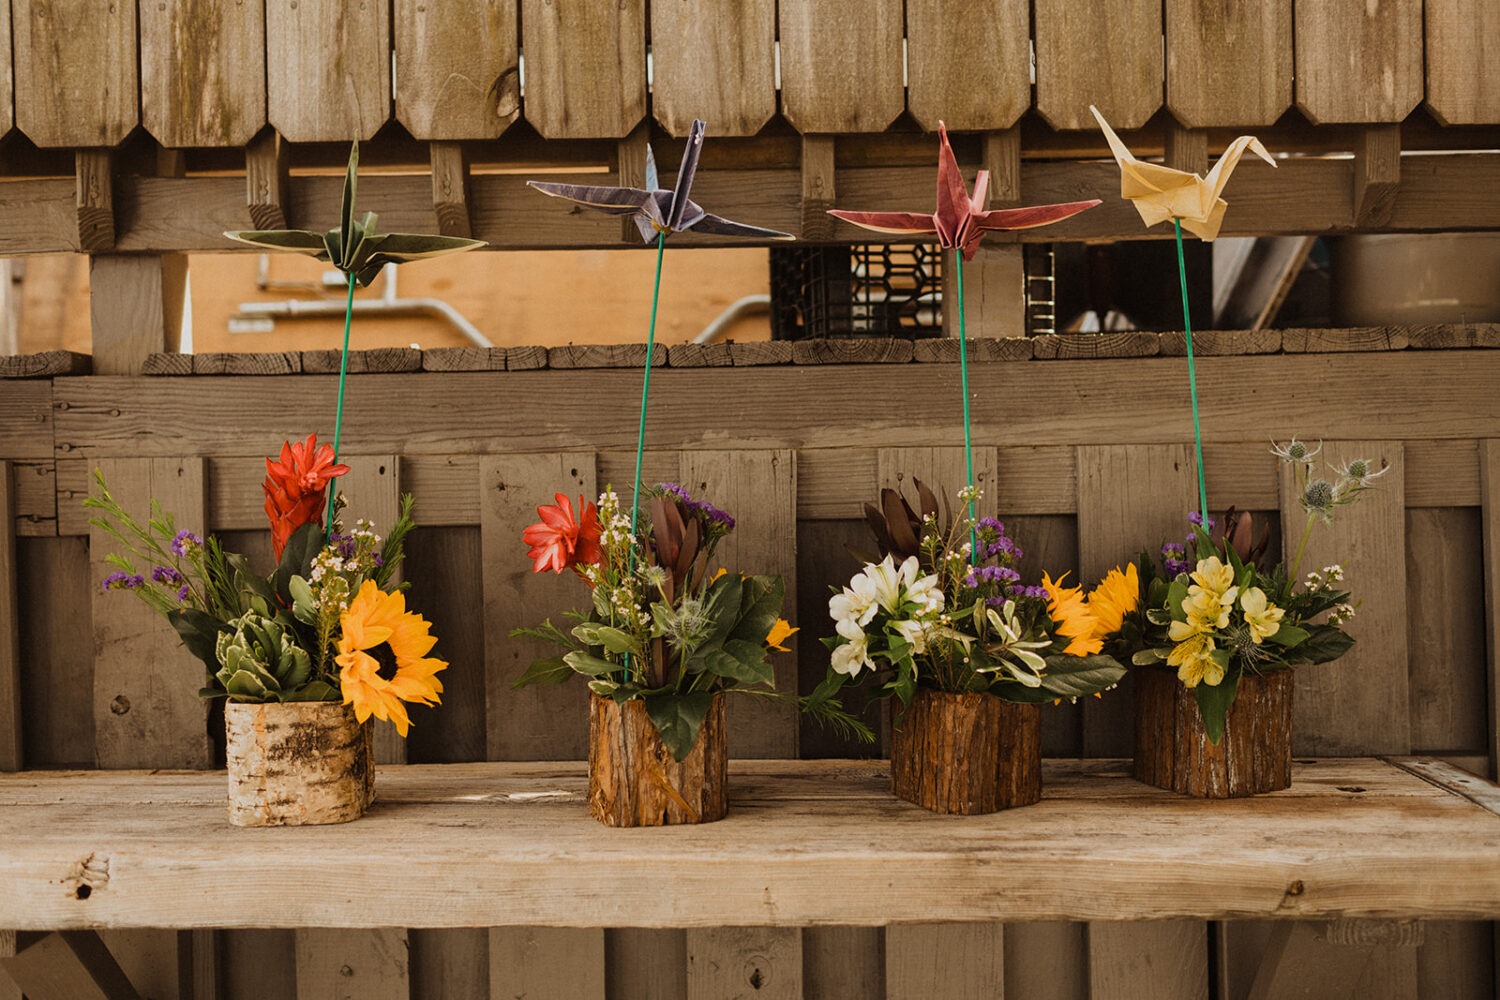 paper cranes in flowers for summer wedding decor